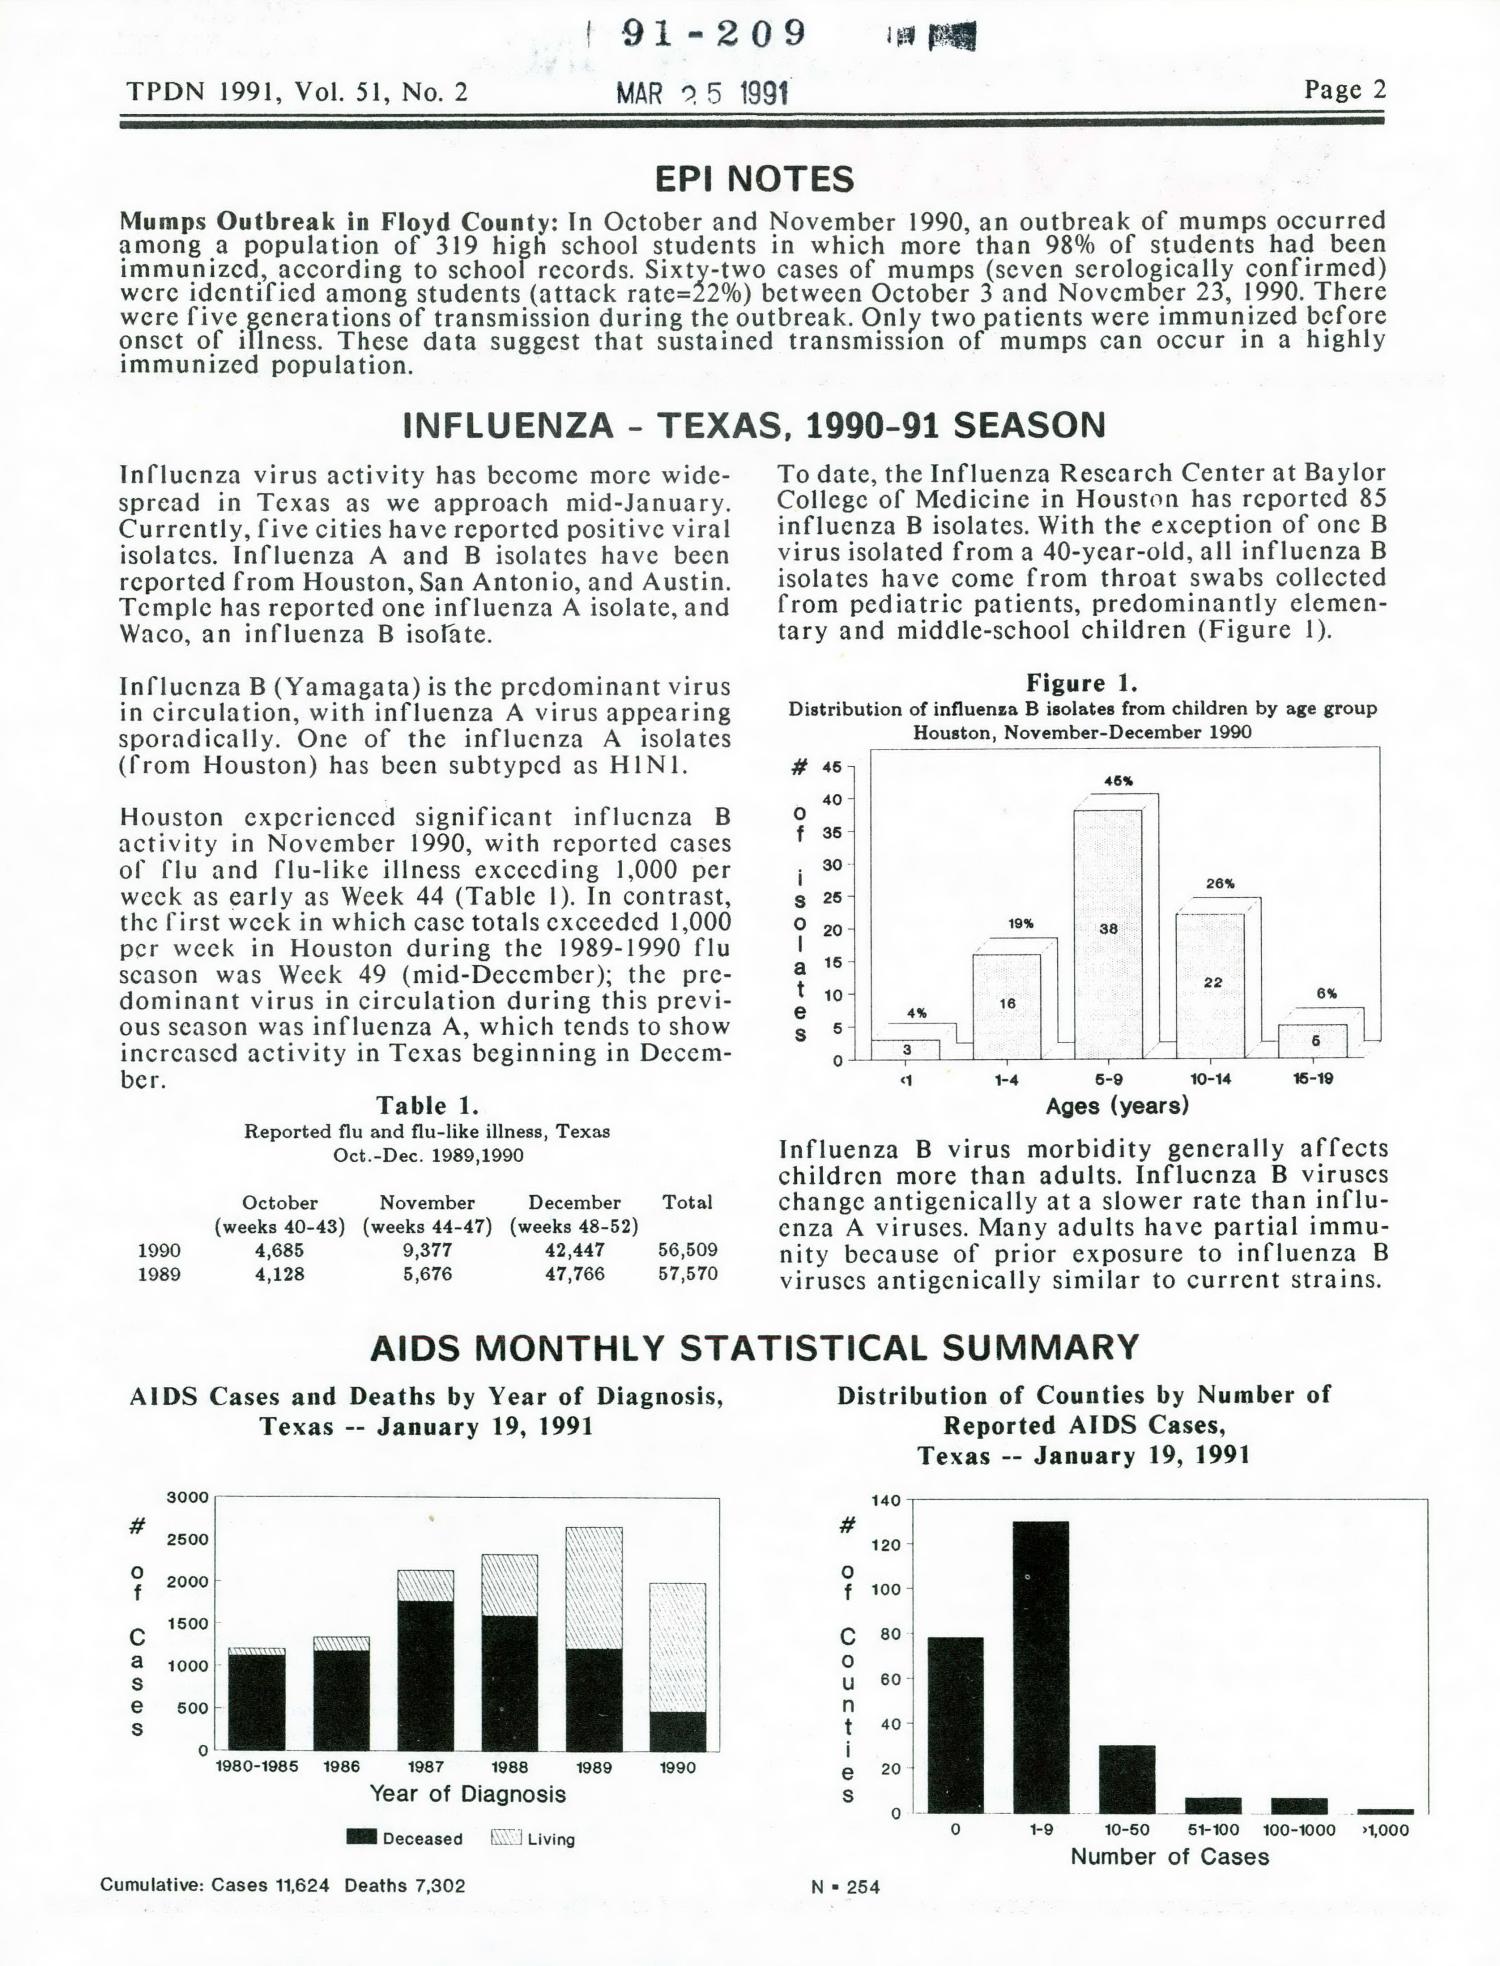 Texas Preventable Disease News, Volume 51, Number 2, January 26, 1991
                                                
                                                    Page2
                                                